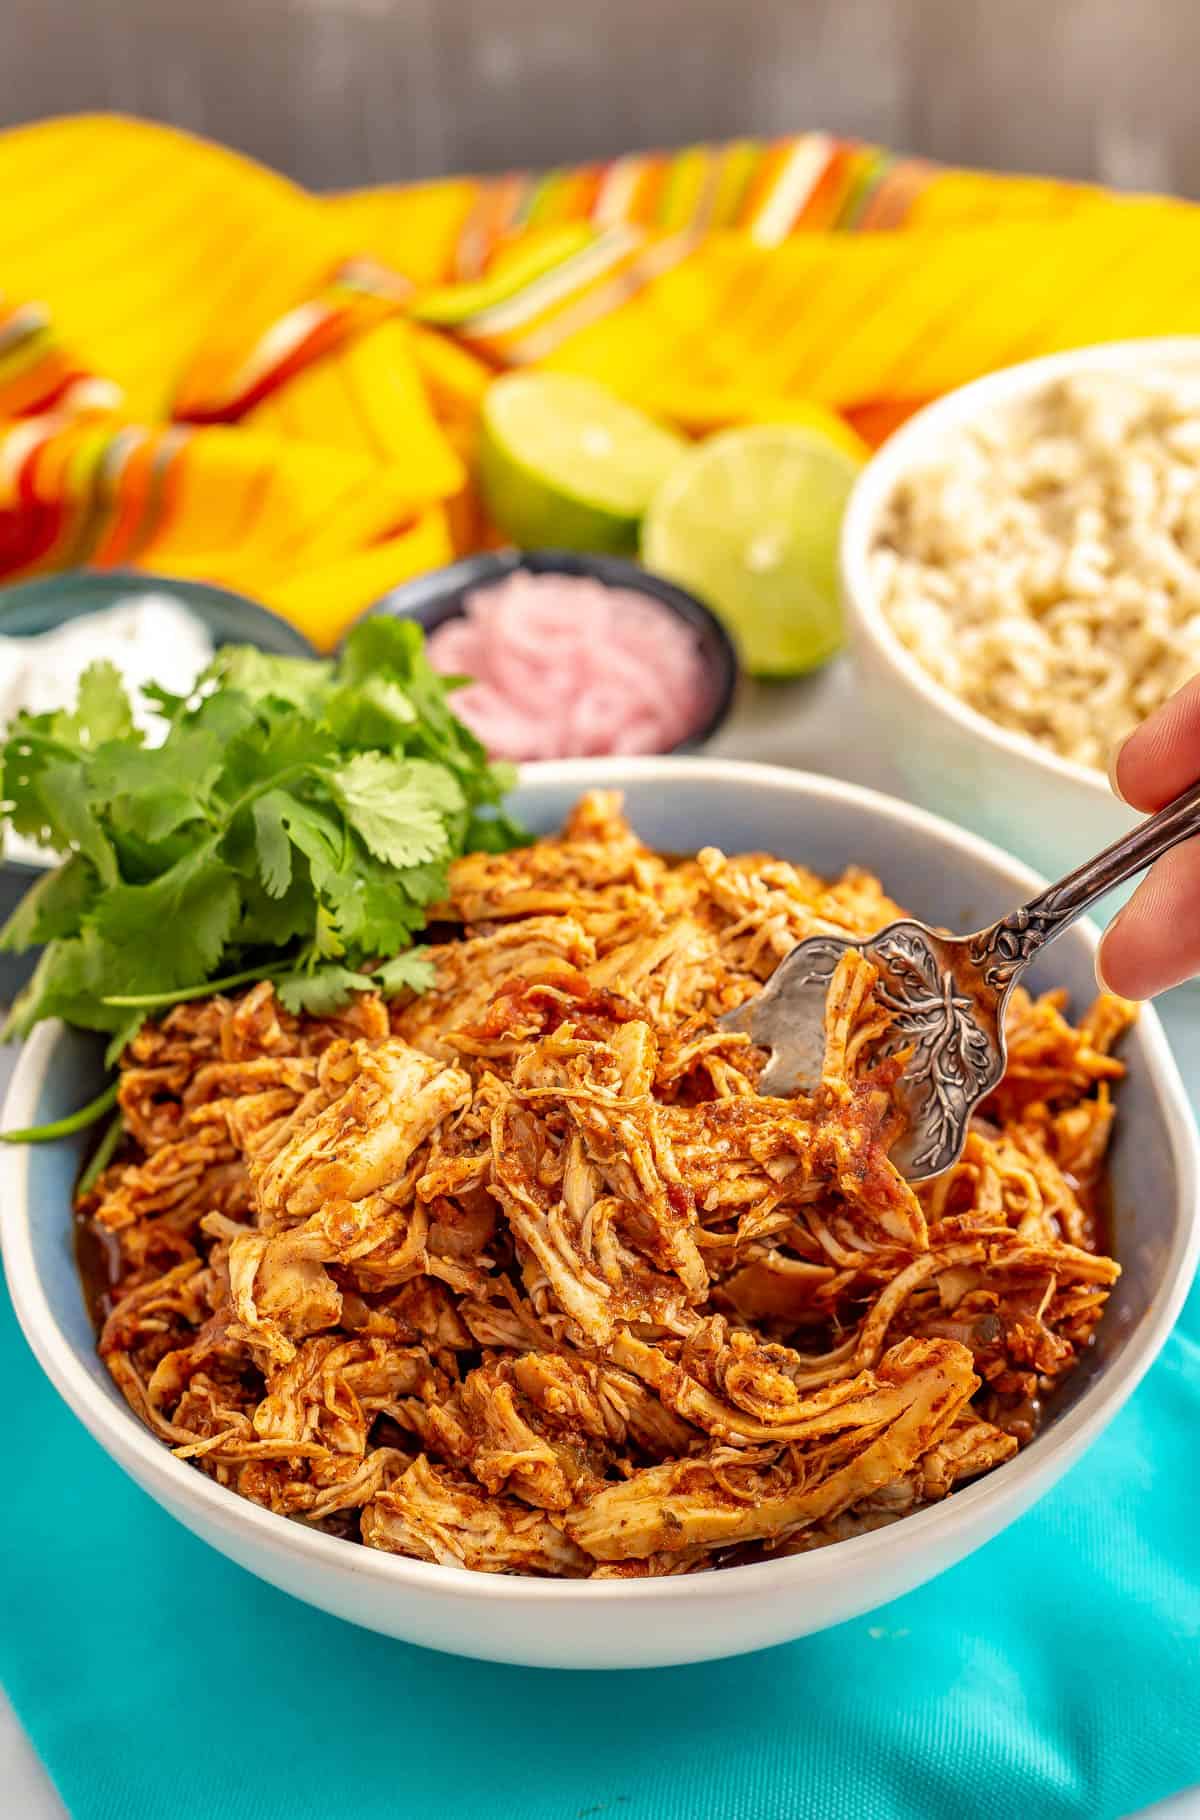 A serving fork scooping up some cooked shredded Mexican chicken from a bowl.